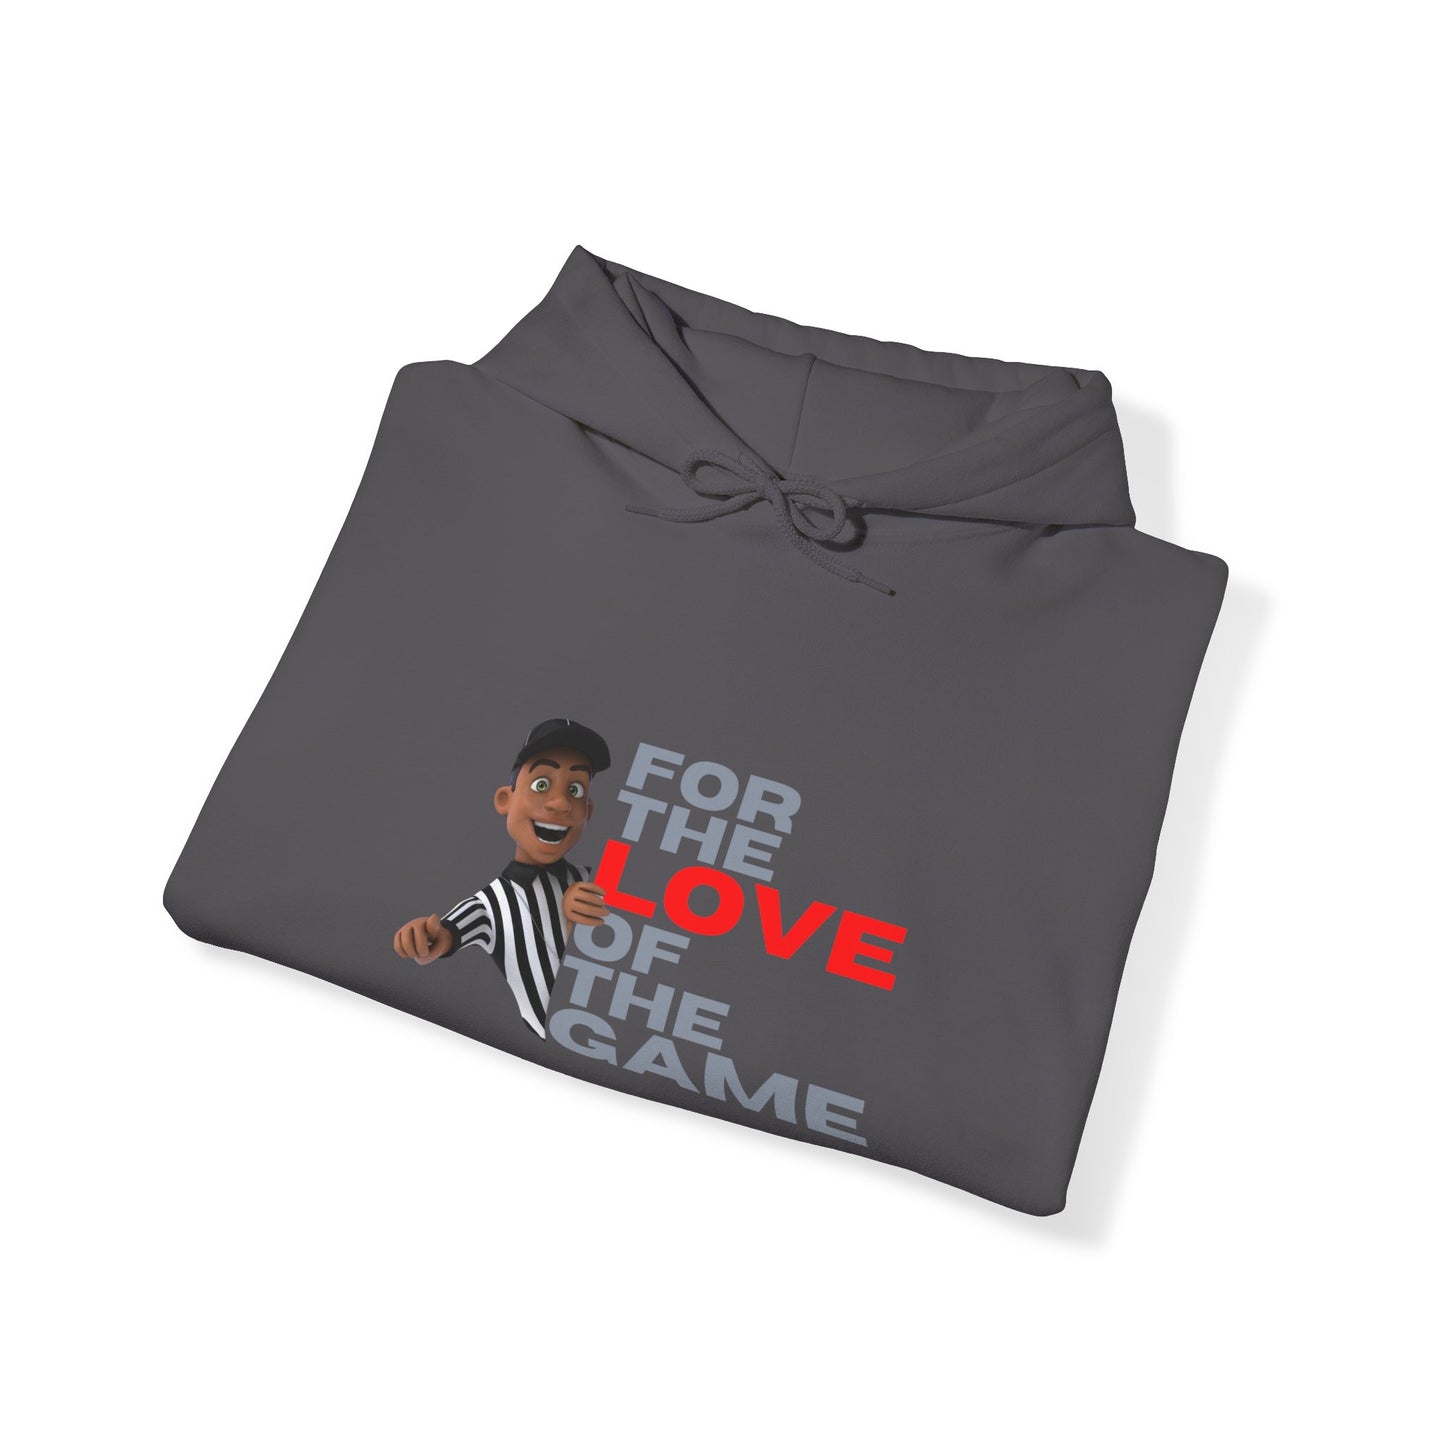 For the Love of the Game Unisex Heavy Blend™ Hooded Sweatshirt | For Referees | For Sports Officials